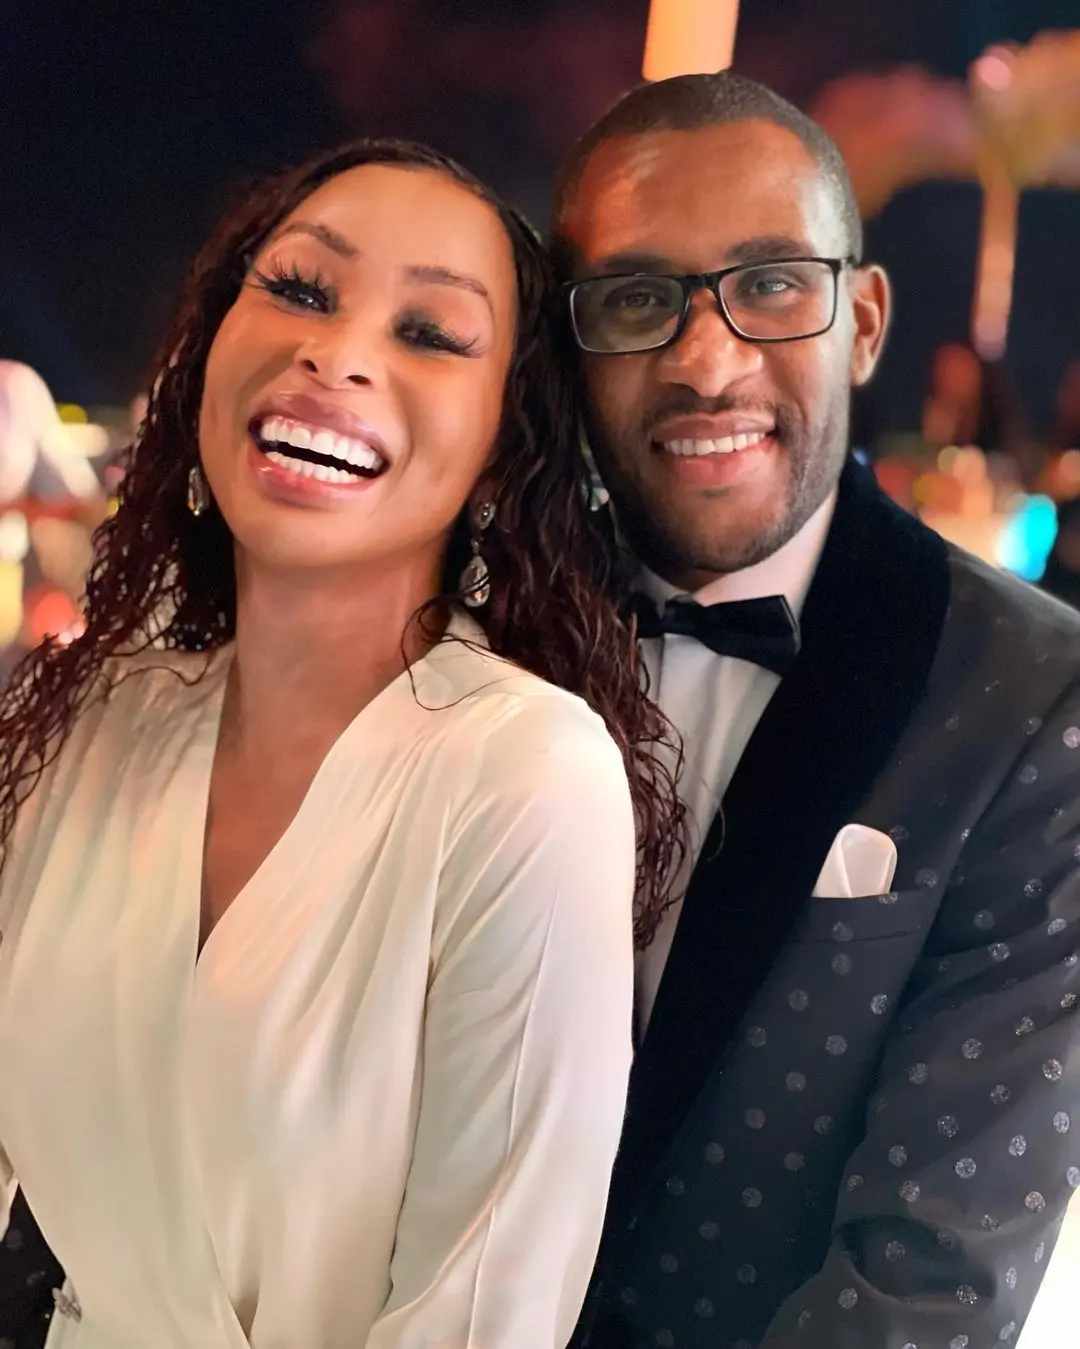 Khanyi Mbau Thanks Kudzai For Allowing Her To Chase Her Dreams